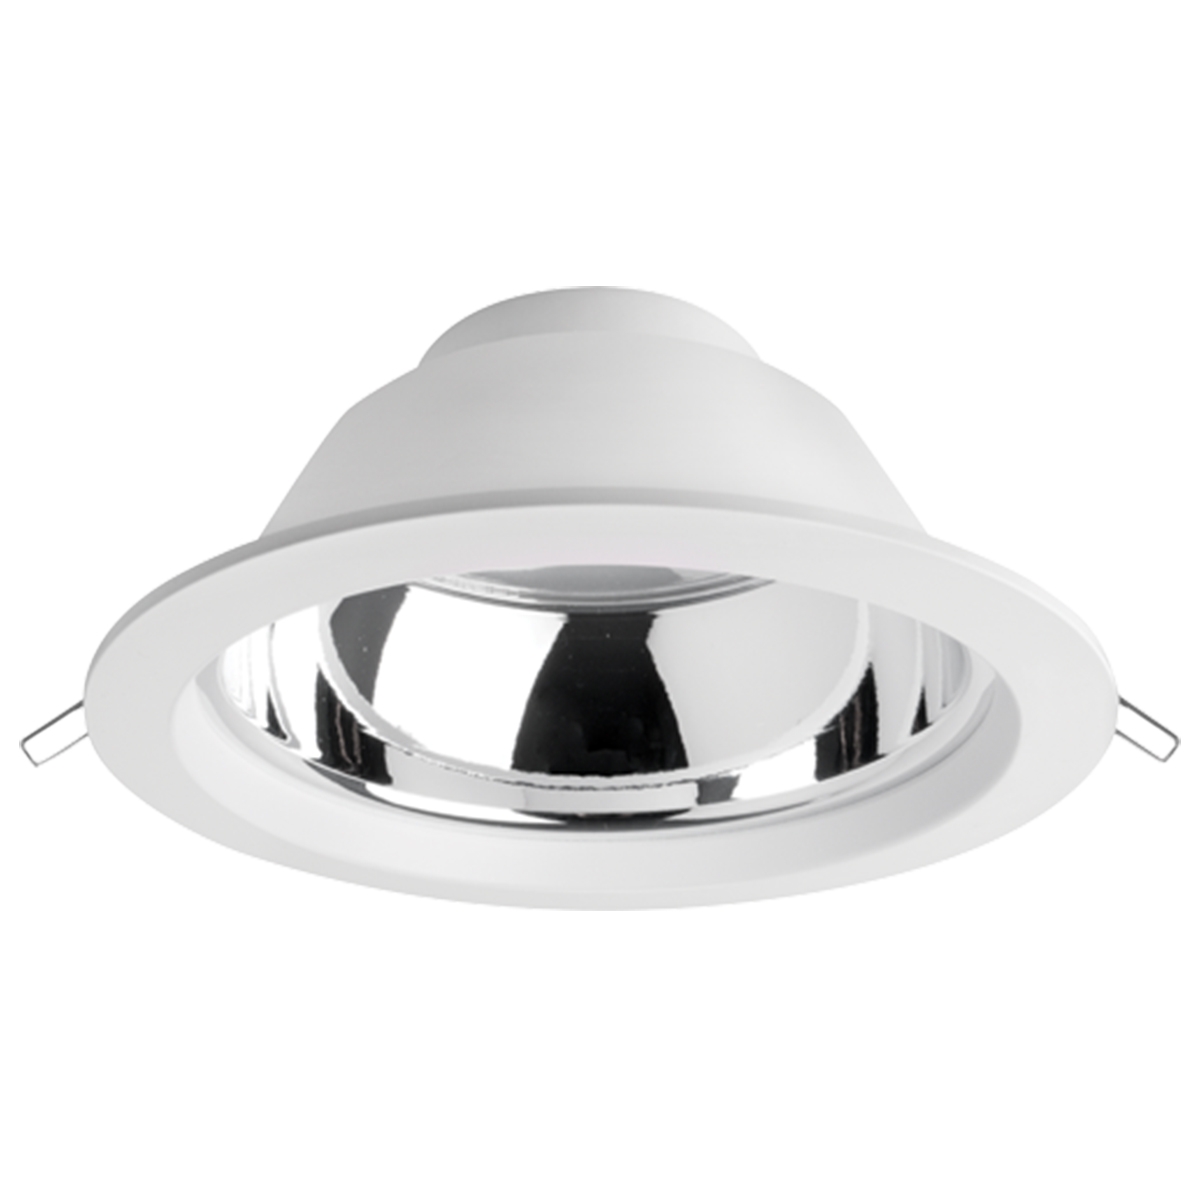 Megaman Recessed Integrated LED Downlight F54200RC 15.5W Daylight